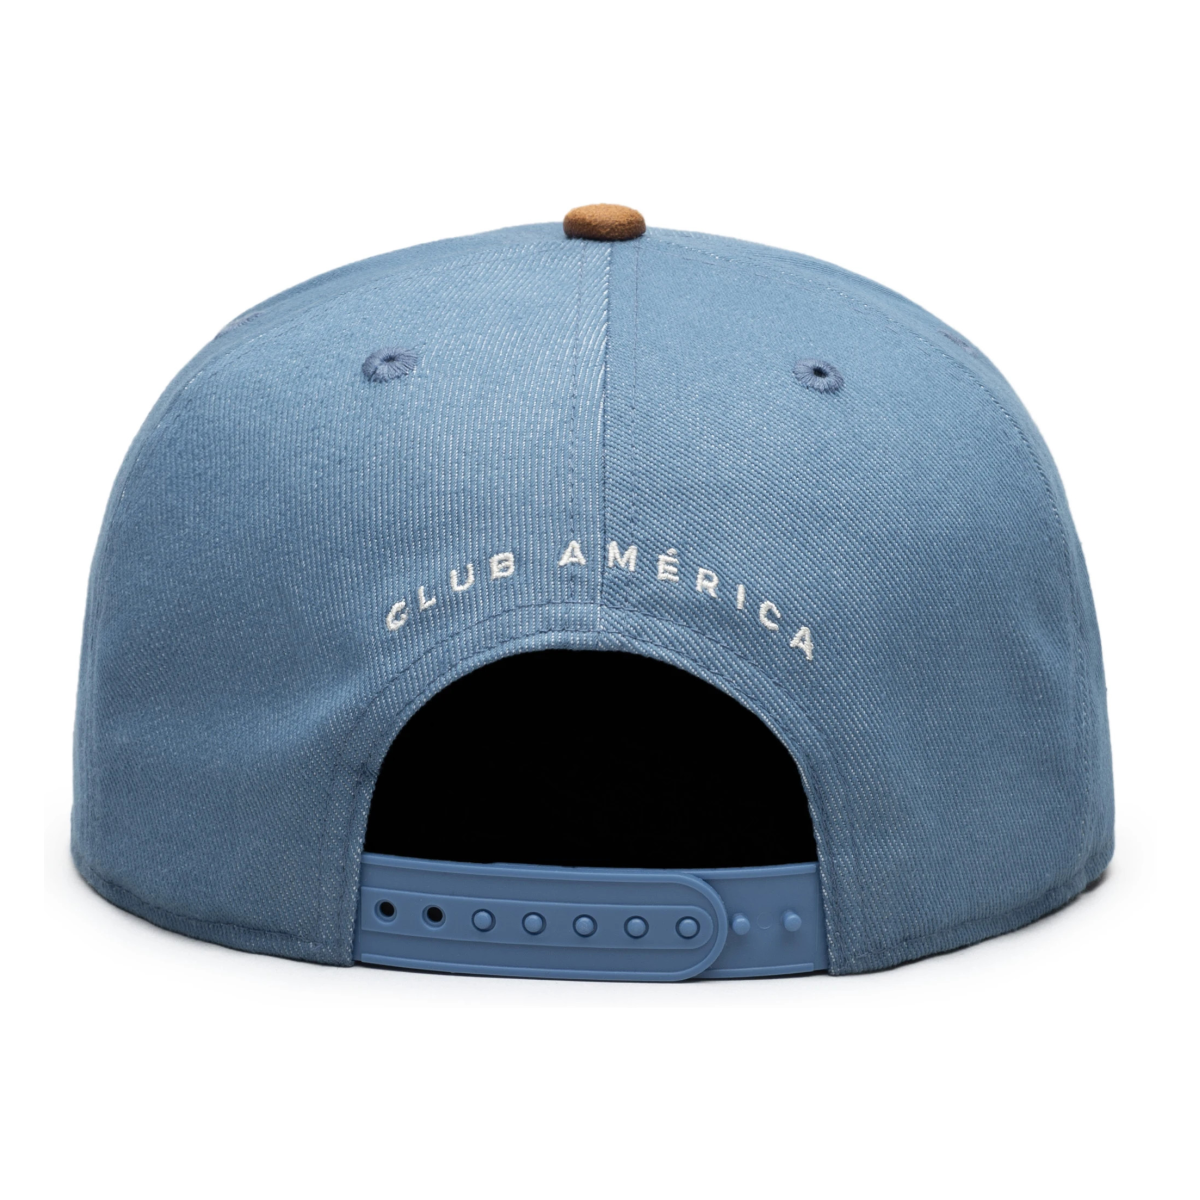 Fi Collections Club America Orion Snapback-Blue/Brown